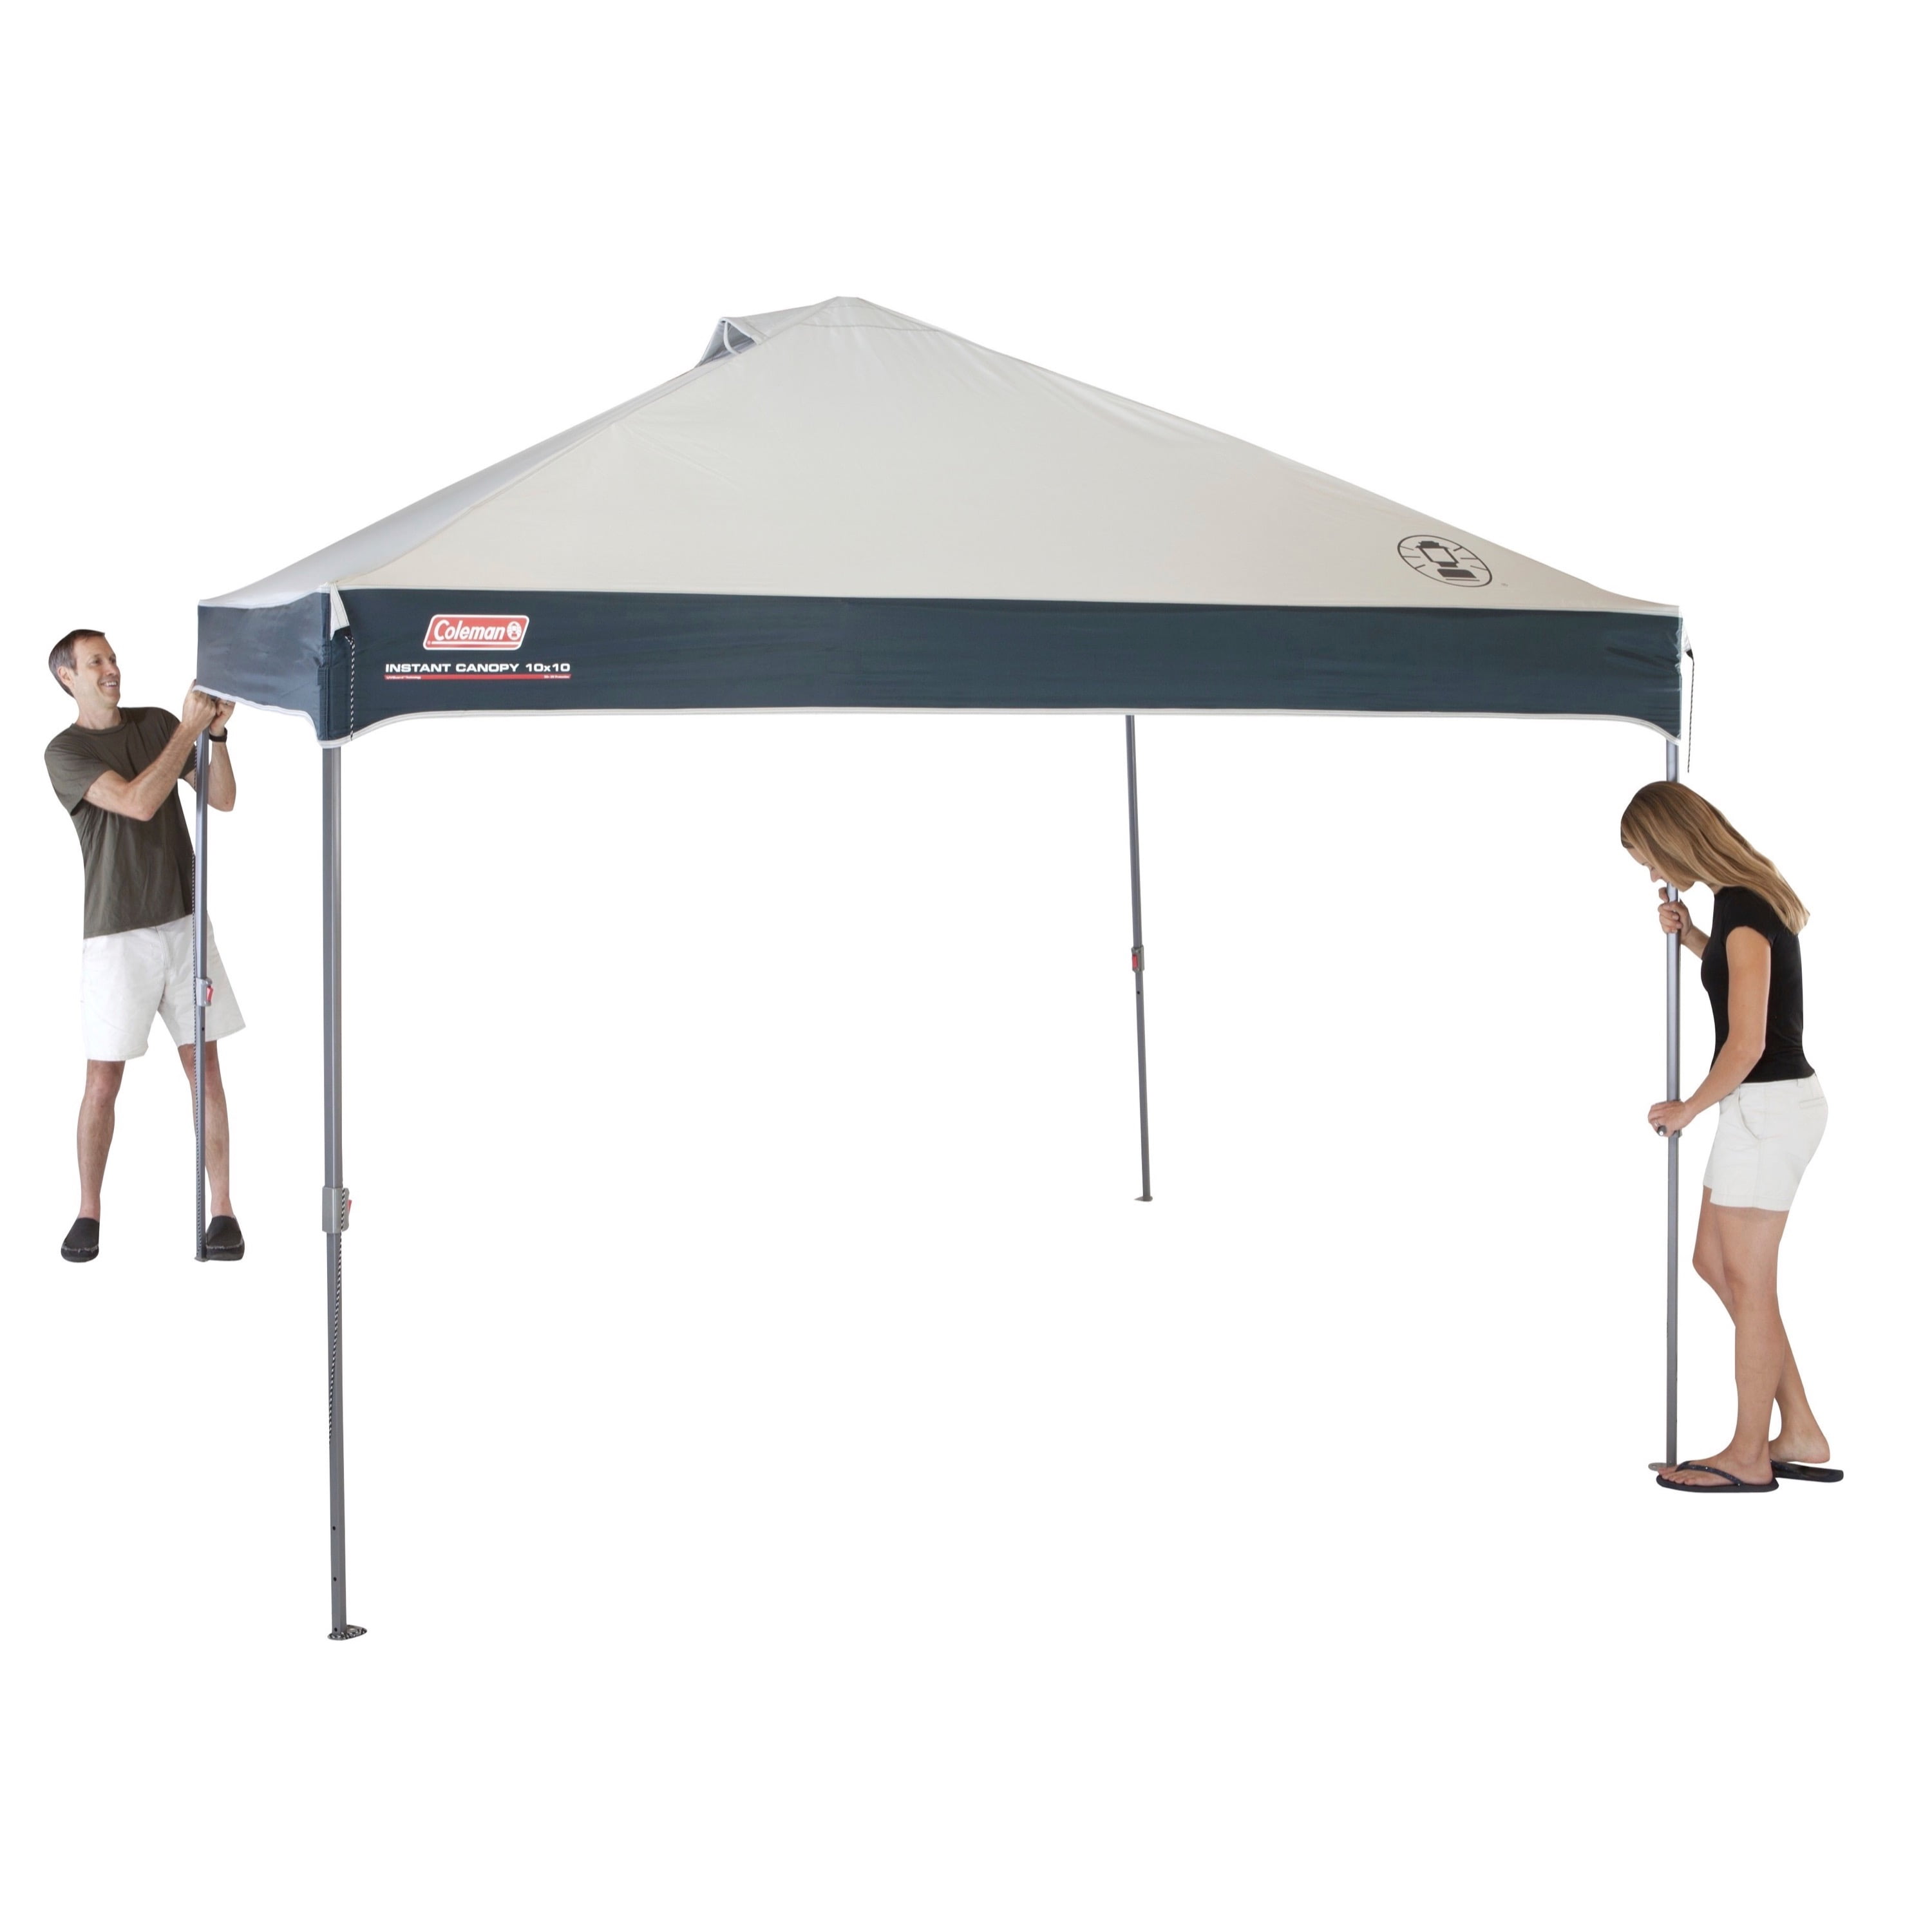 Coleman Instant Canopy Tent 10x10 Outdoor Use Sun Shade Camping Beach Gazebo 